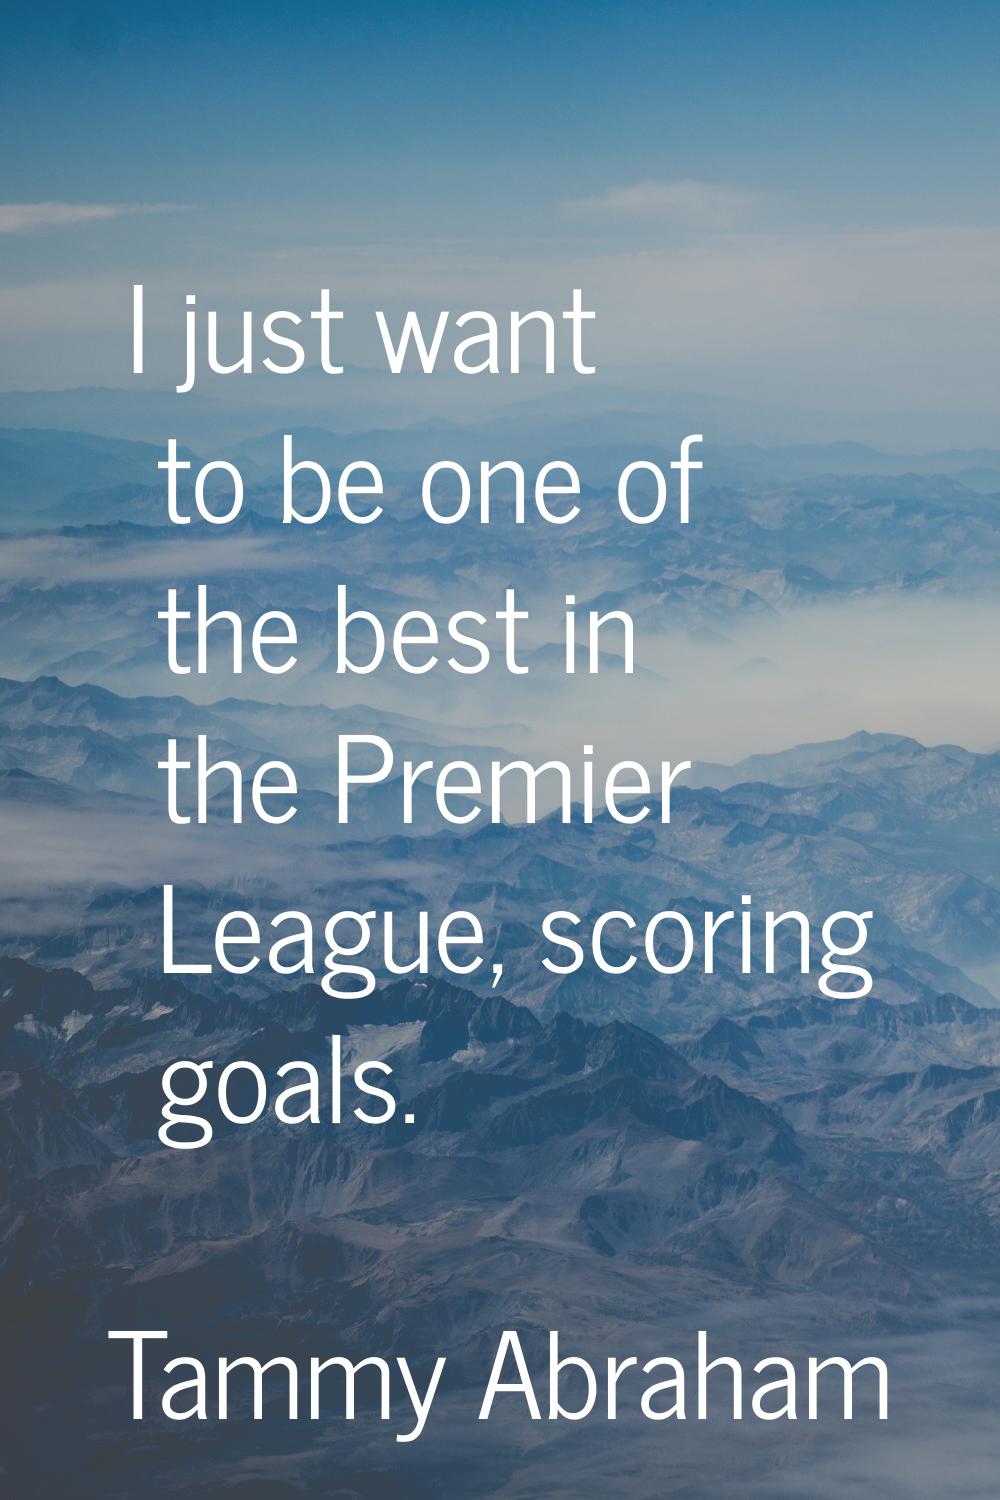 I just want to be one of the best in the Premier League, scoring goals.